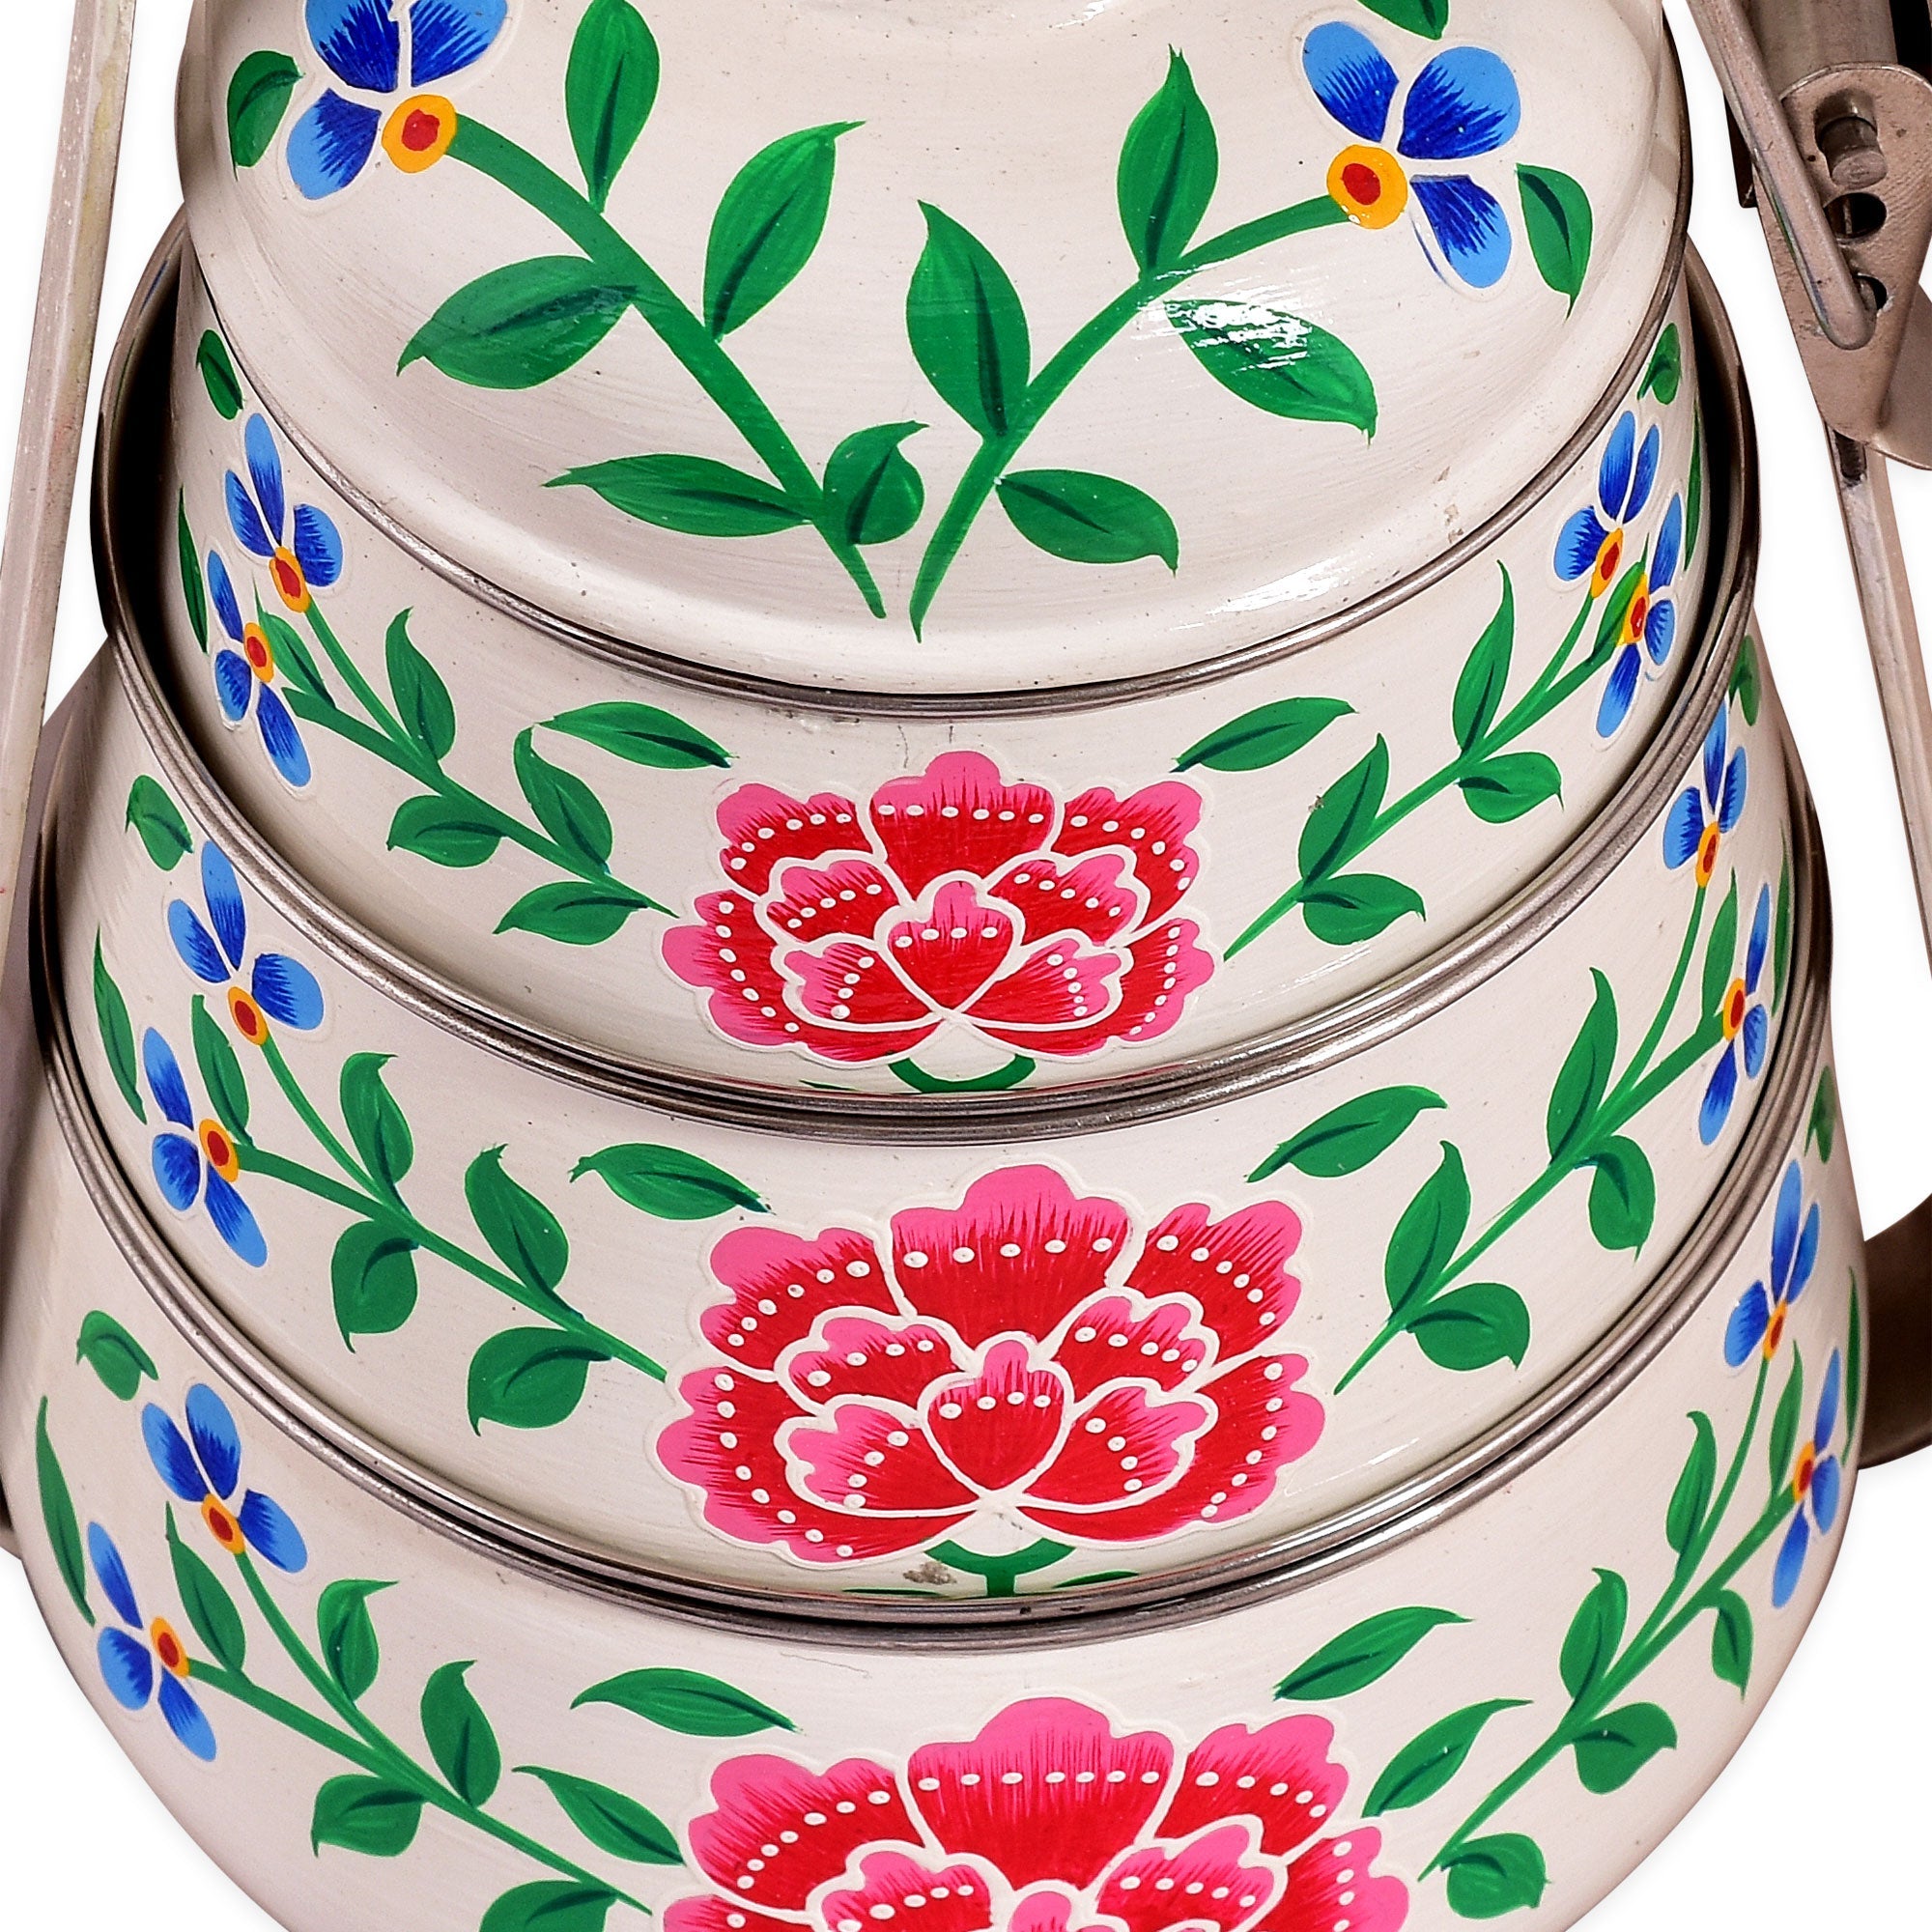 Hand Painted 3 Tier Steel Lunch Box- White Floral Kashmiri Art Tiffin